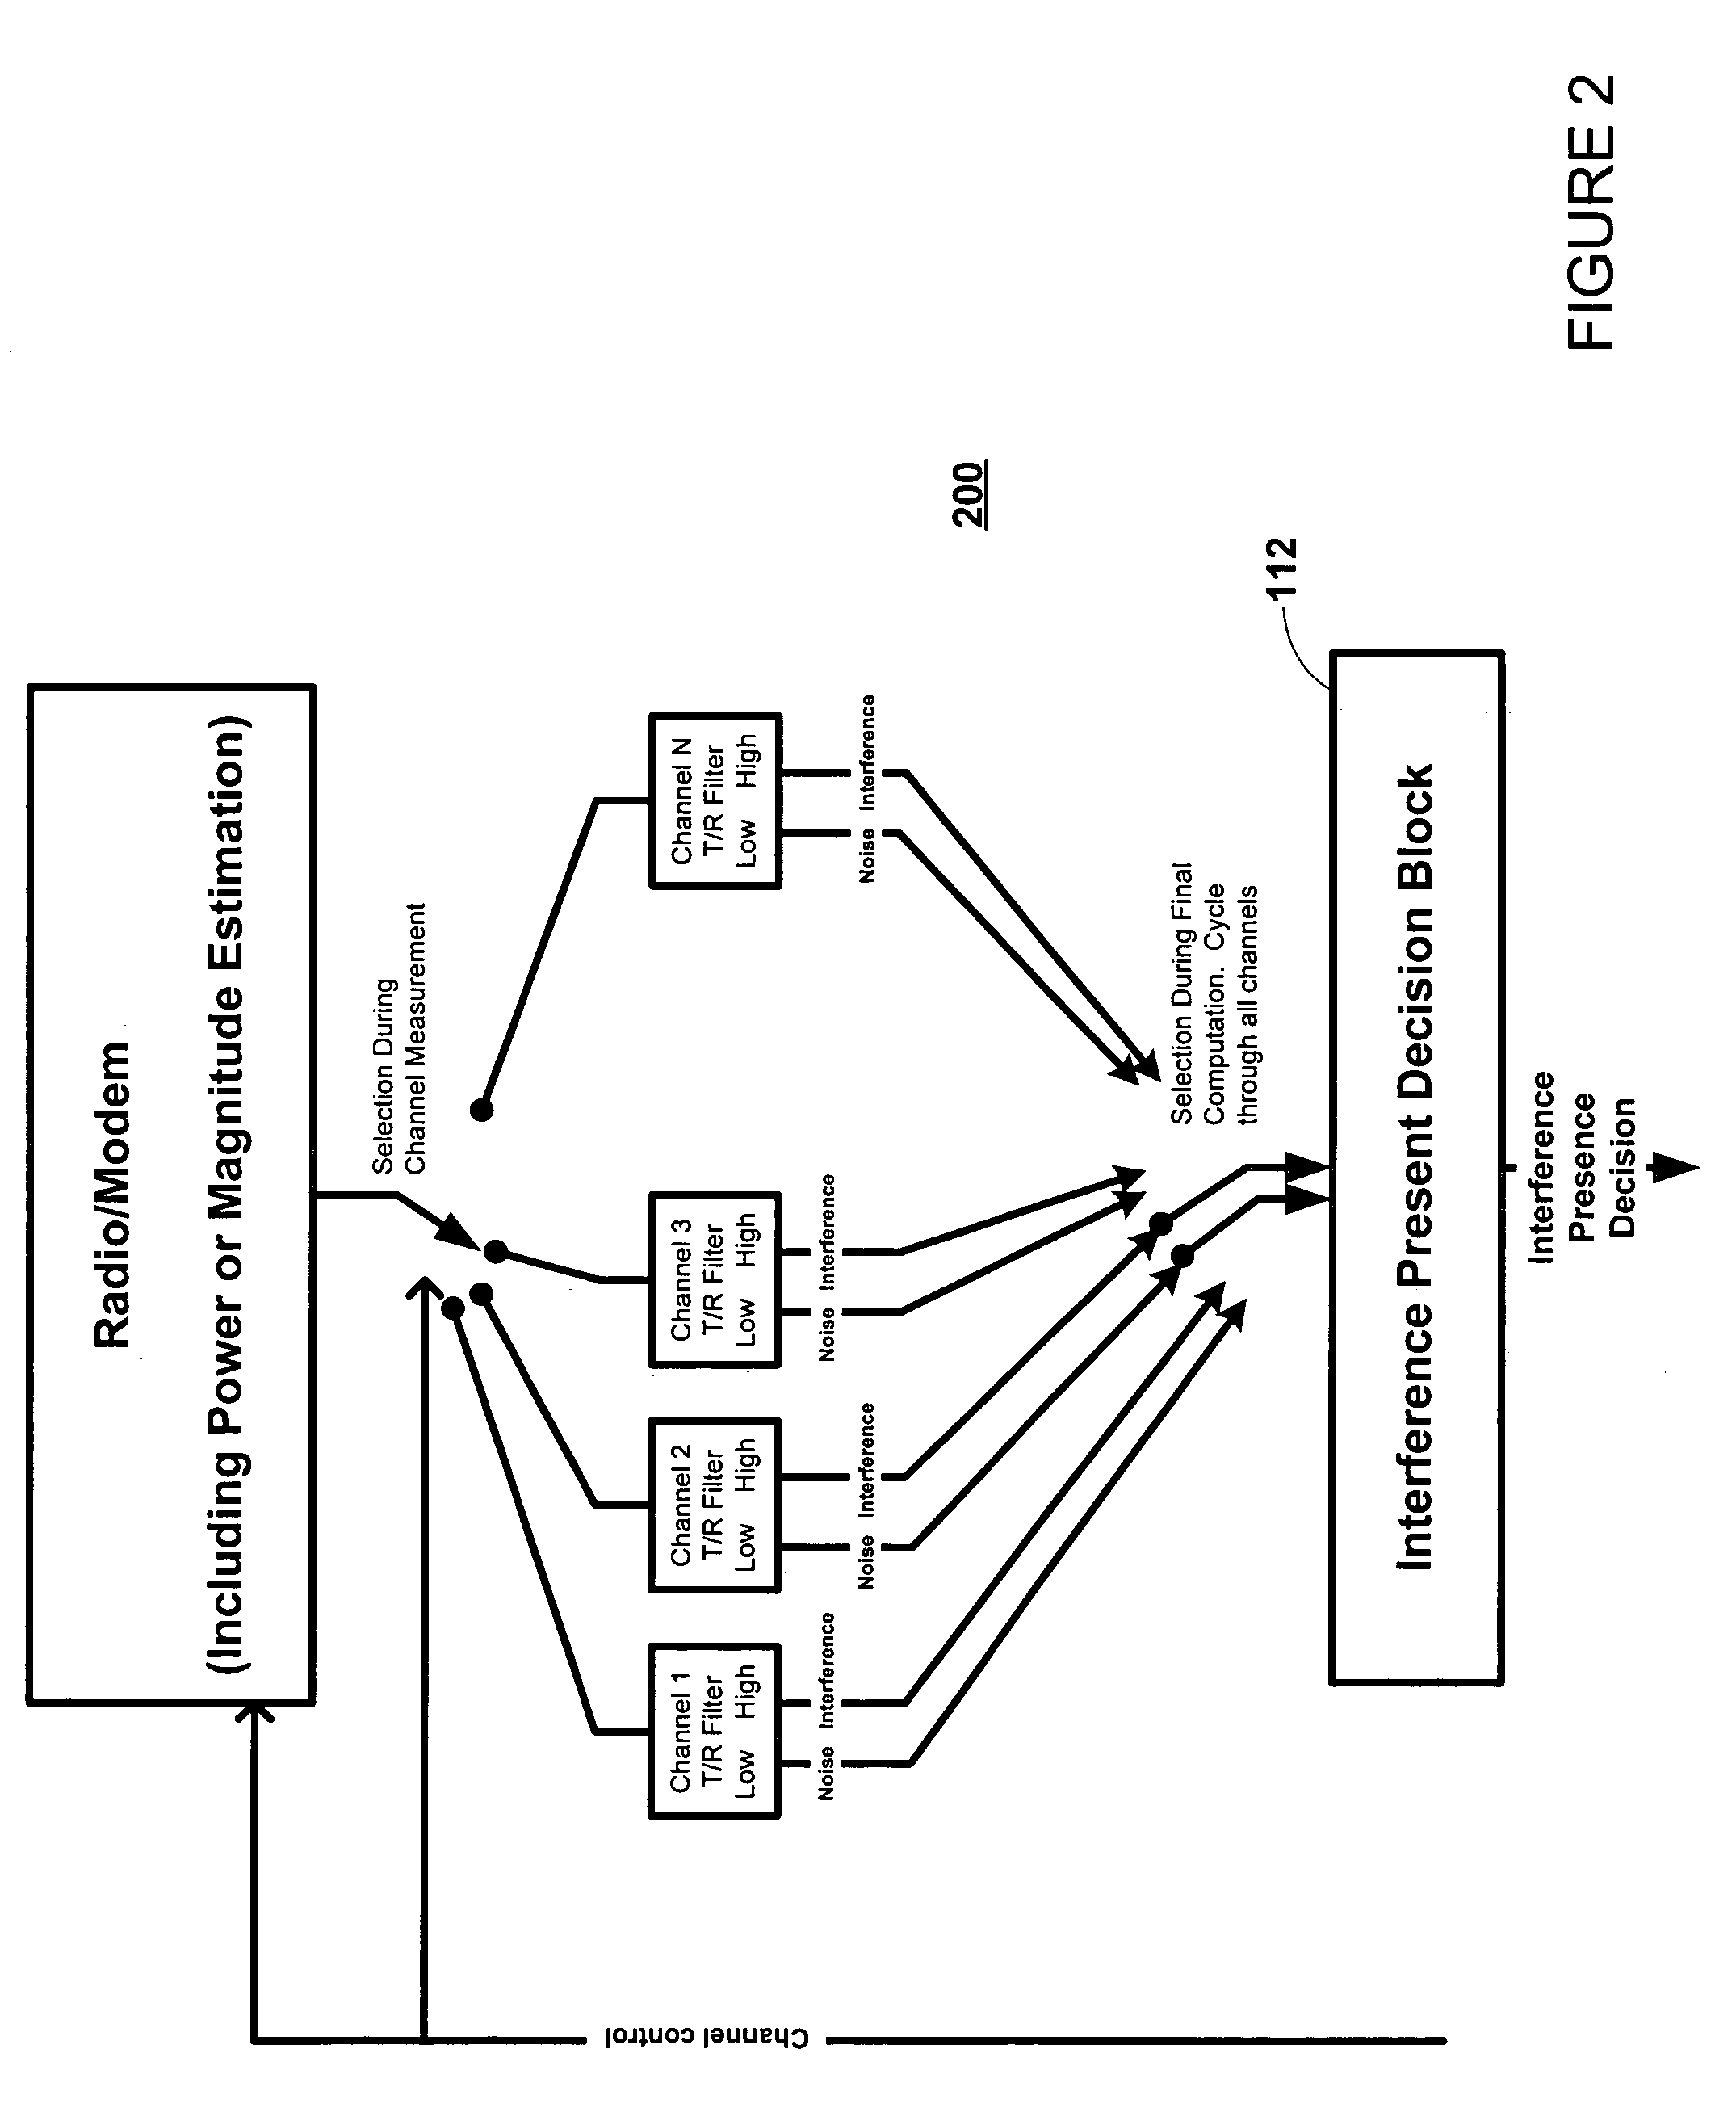 Method and apparatus determining the presence of interference in a wireless communication channel